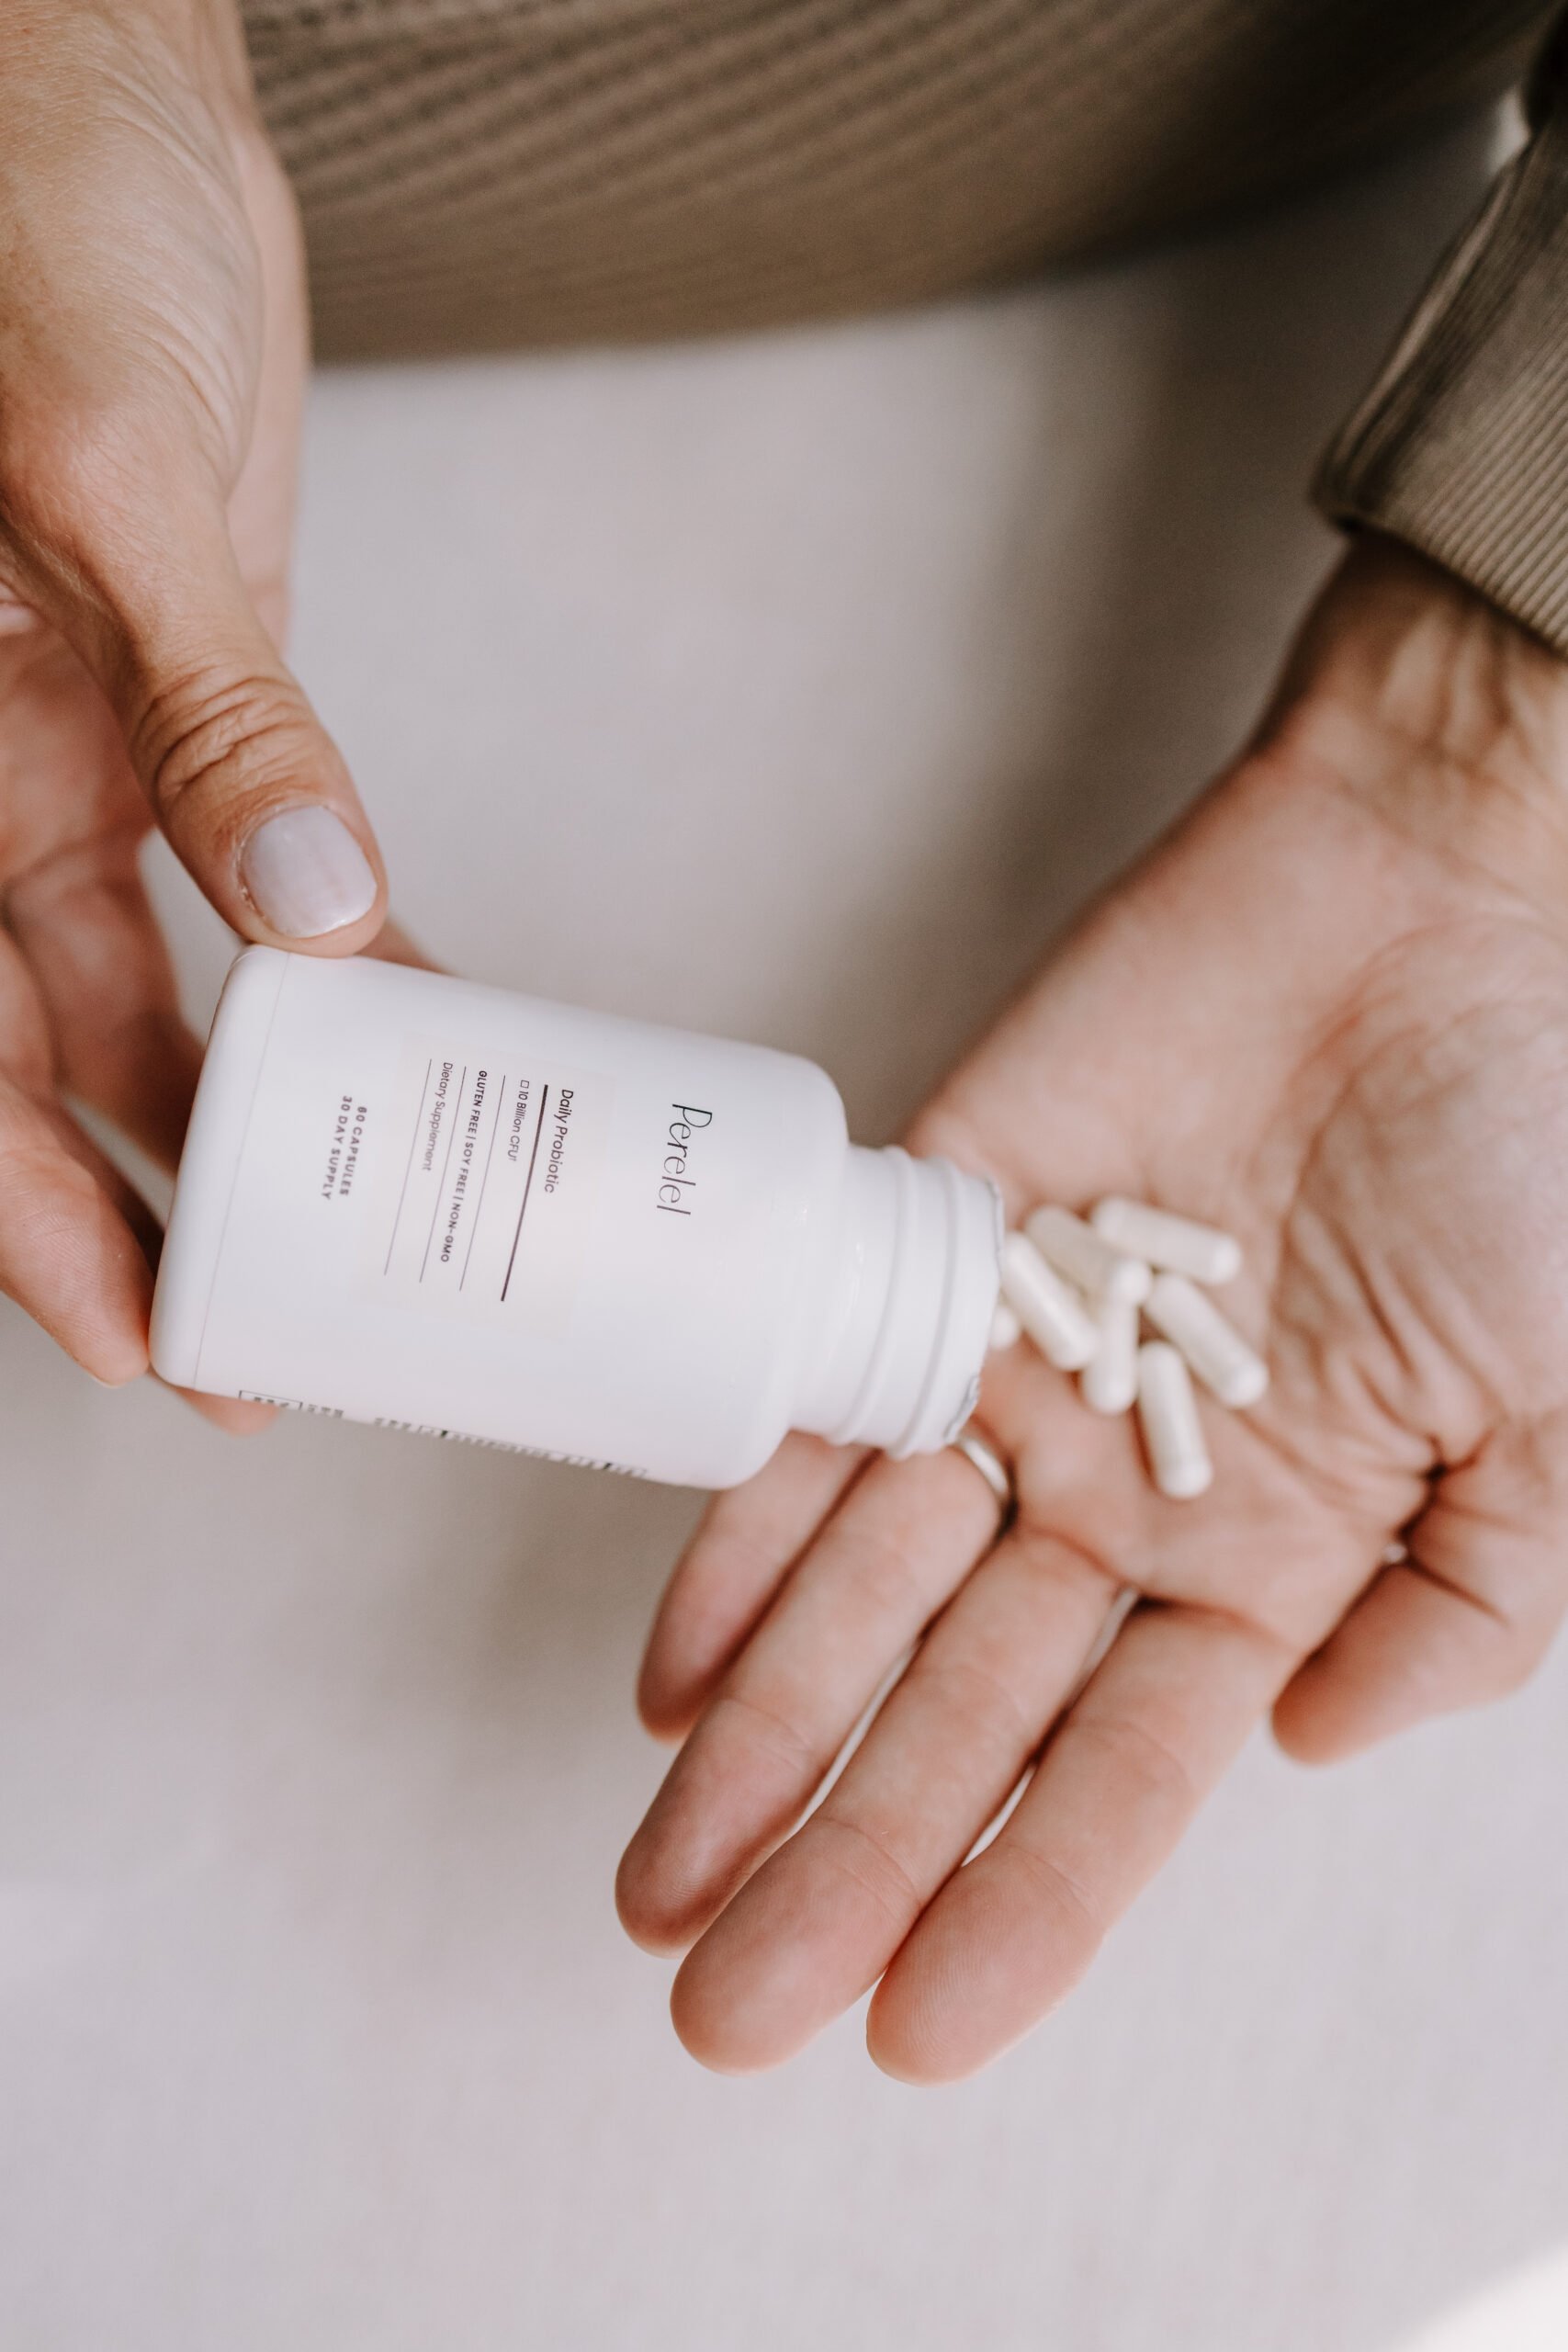 Perelel Daily Probiotic in someone's hands. 